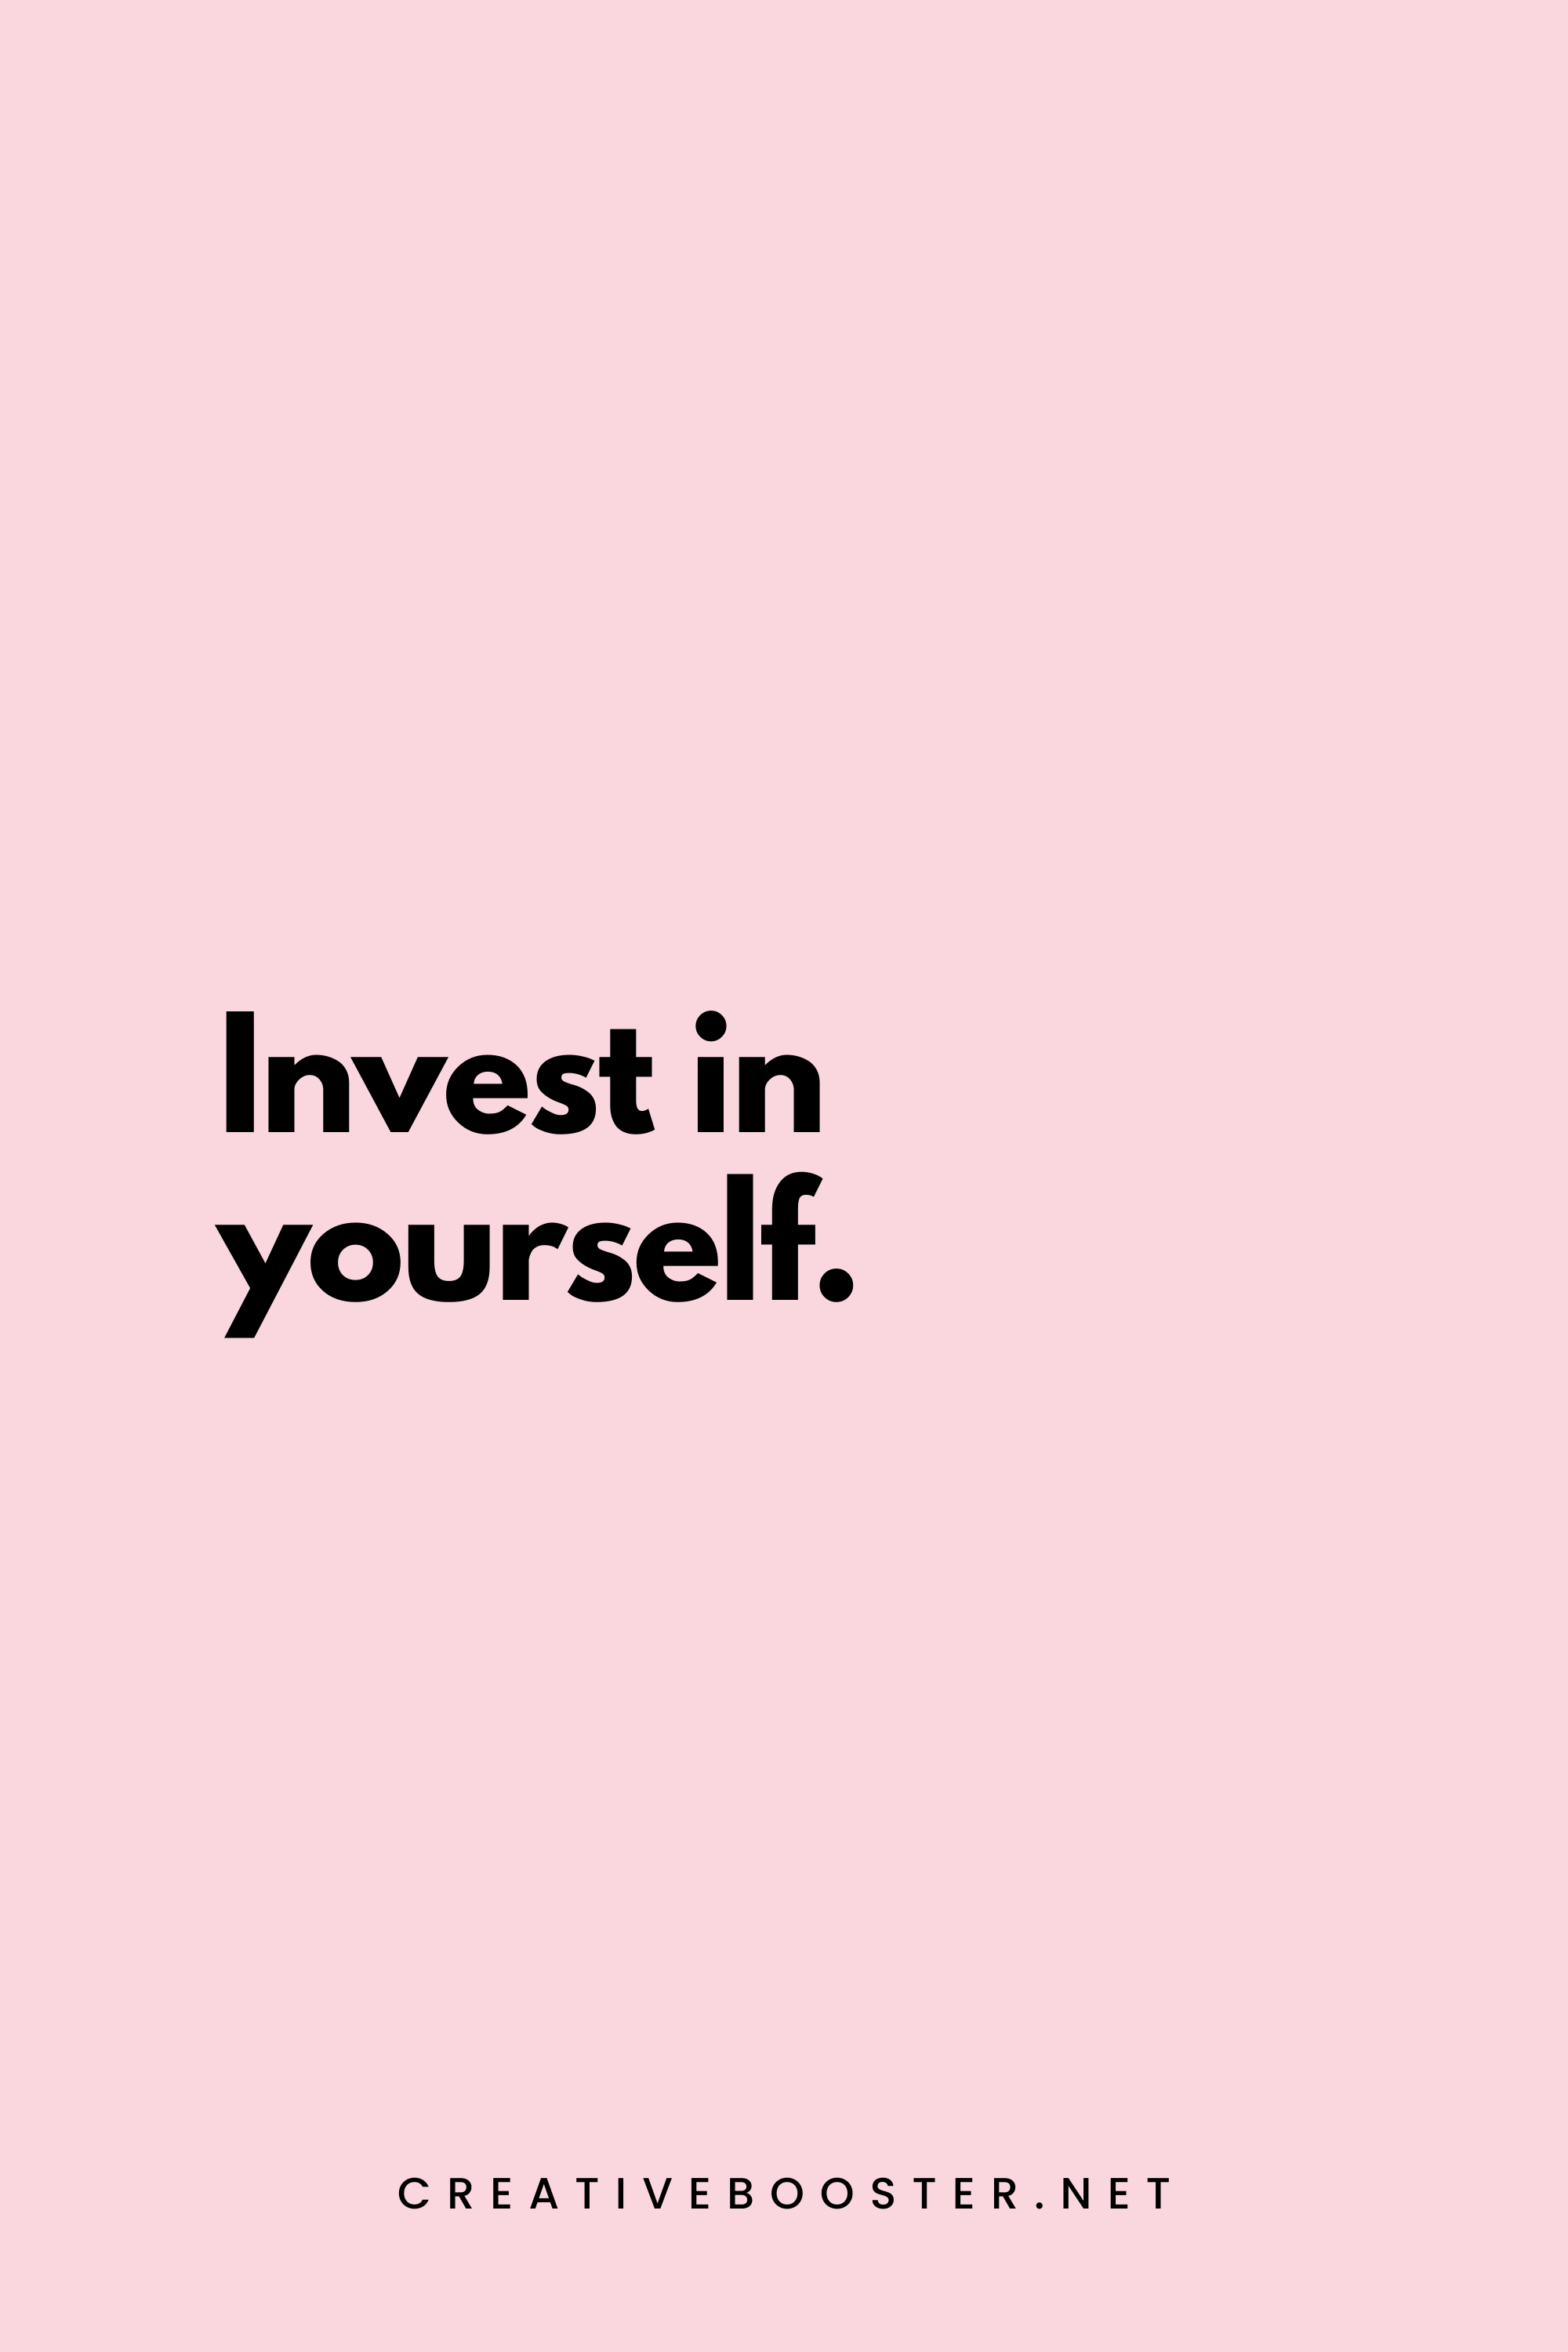 23. Invest in yourself. - Warren Buffett - 2. Short Financial Freedom Quotes